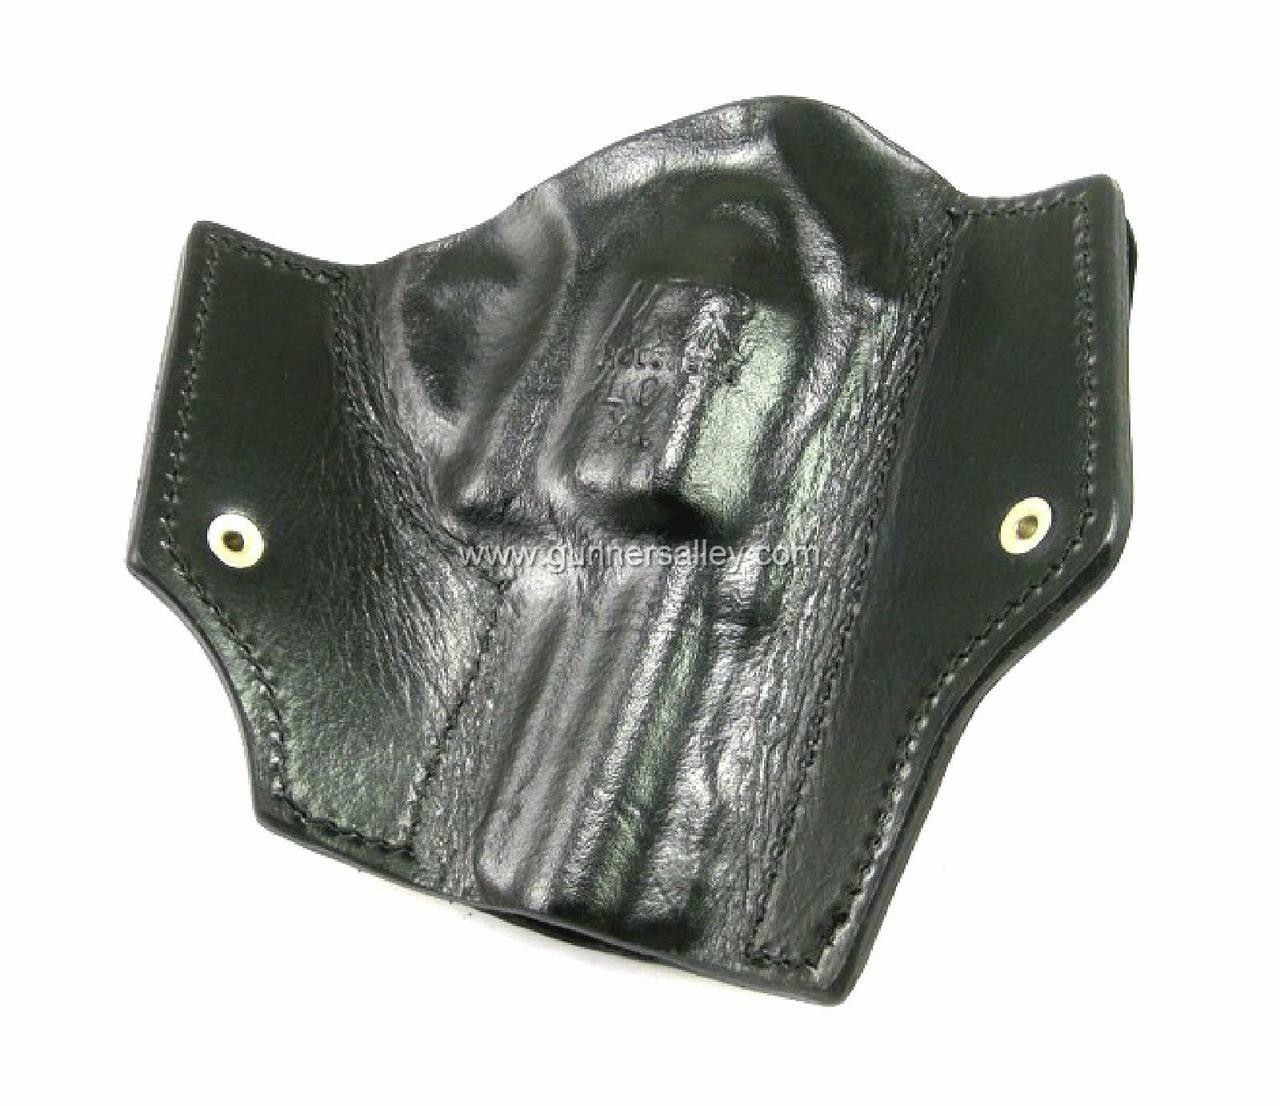 LH Black MTR Slimline Tuckable IWB Holster for a Ruger LCRX 3" - Rear View